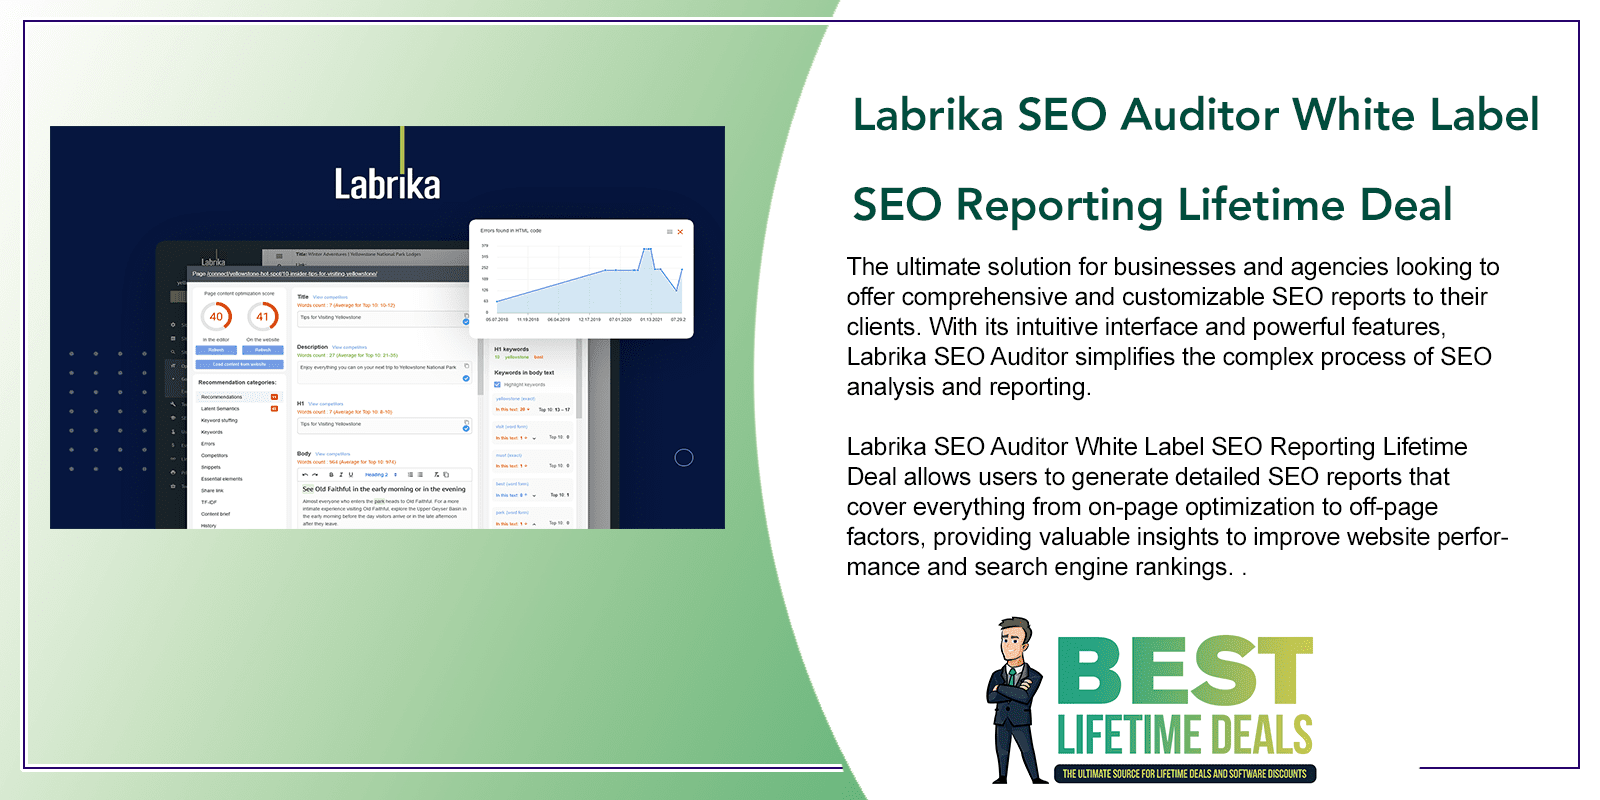 Labrika SEO Auditor White Label SEO Reporting Featured Image